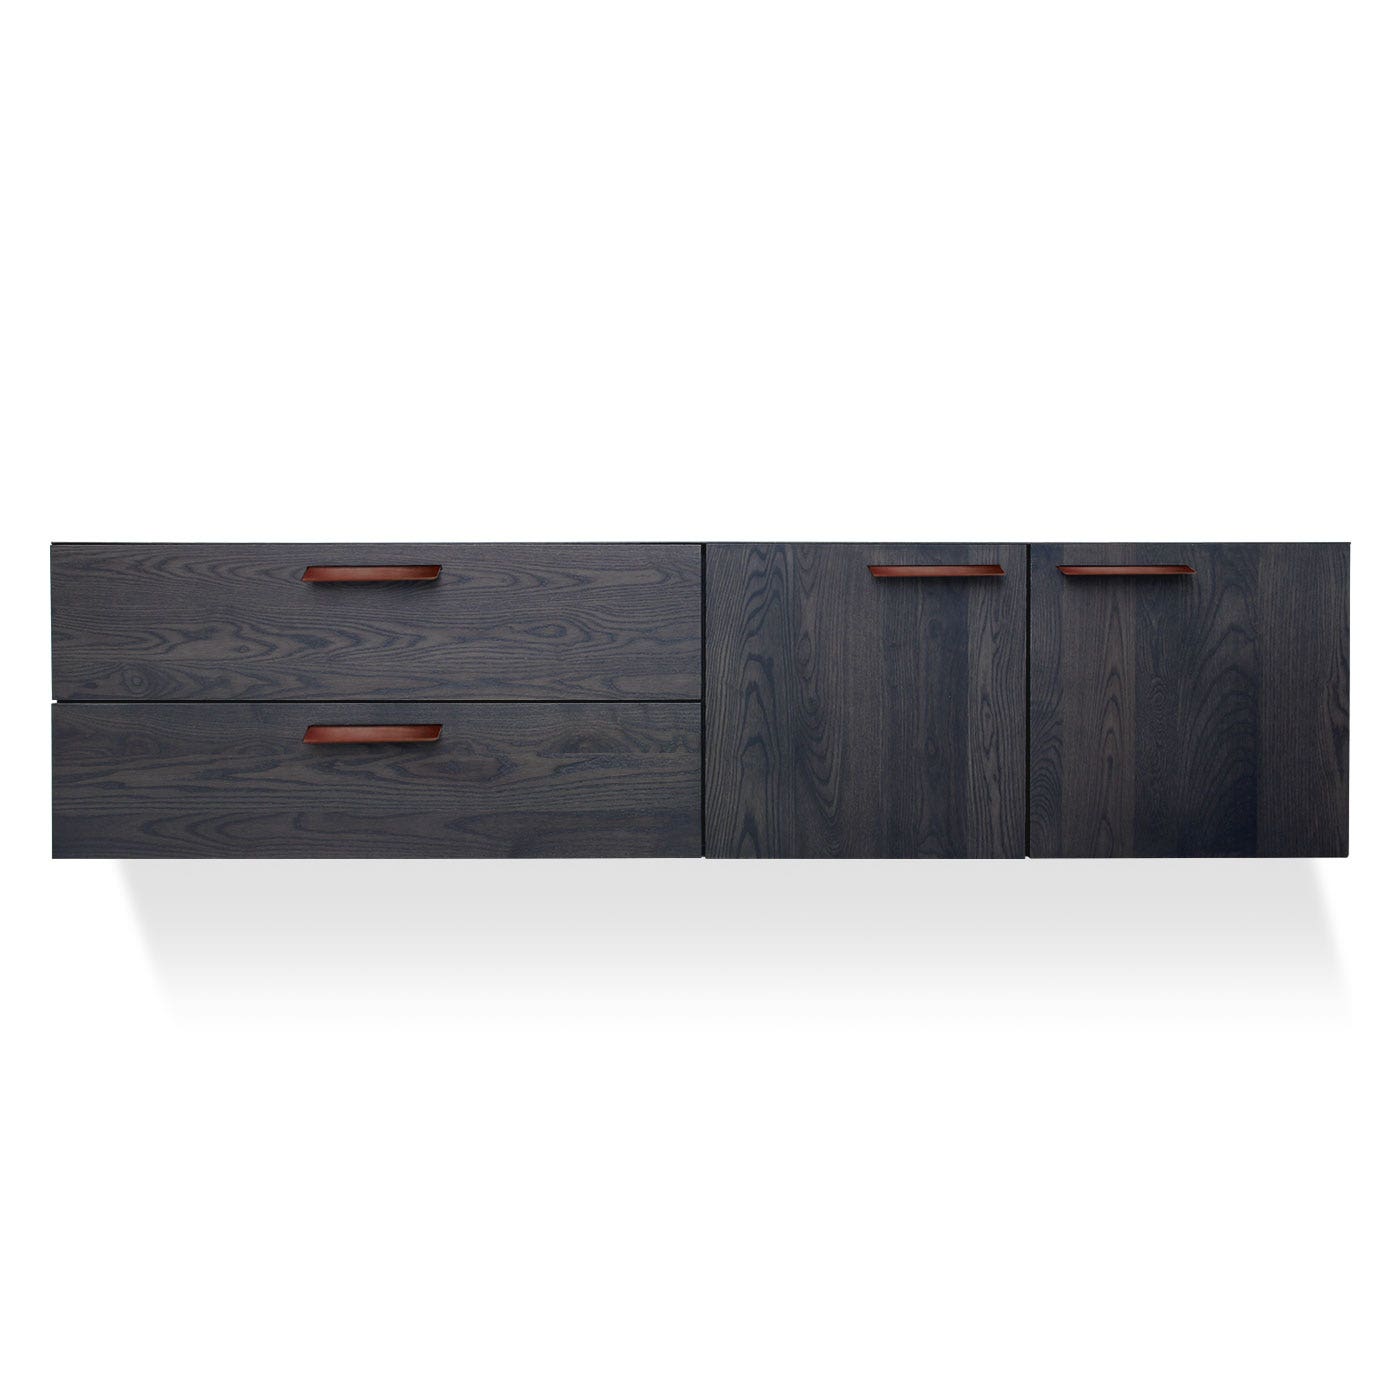 Shale 2 Door / 2 Drawer Wall-Mounted Cabinet